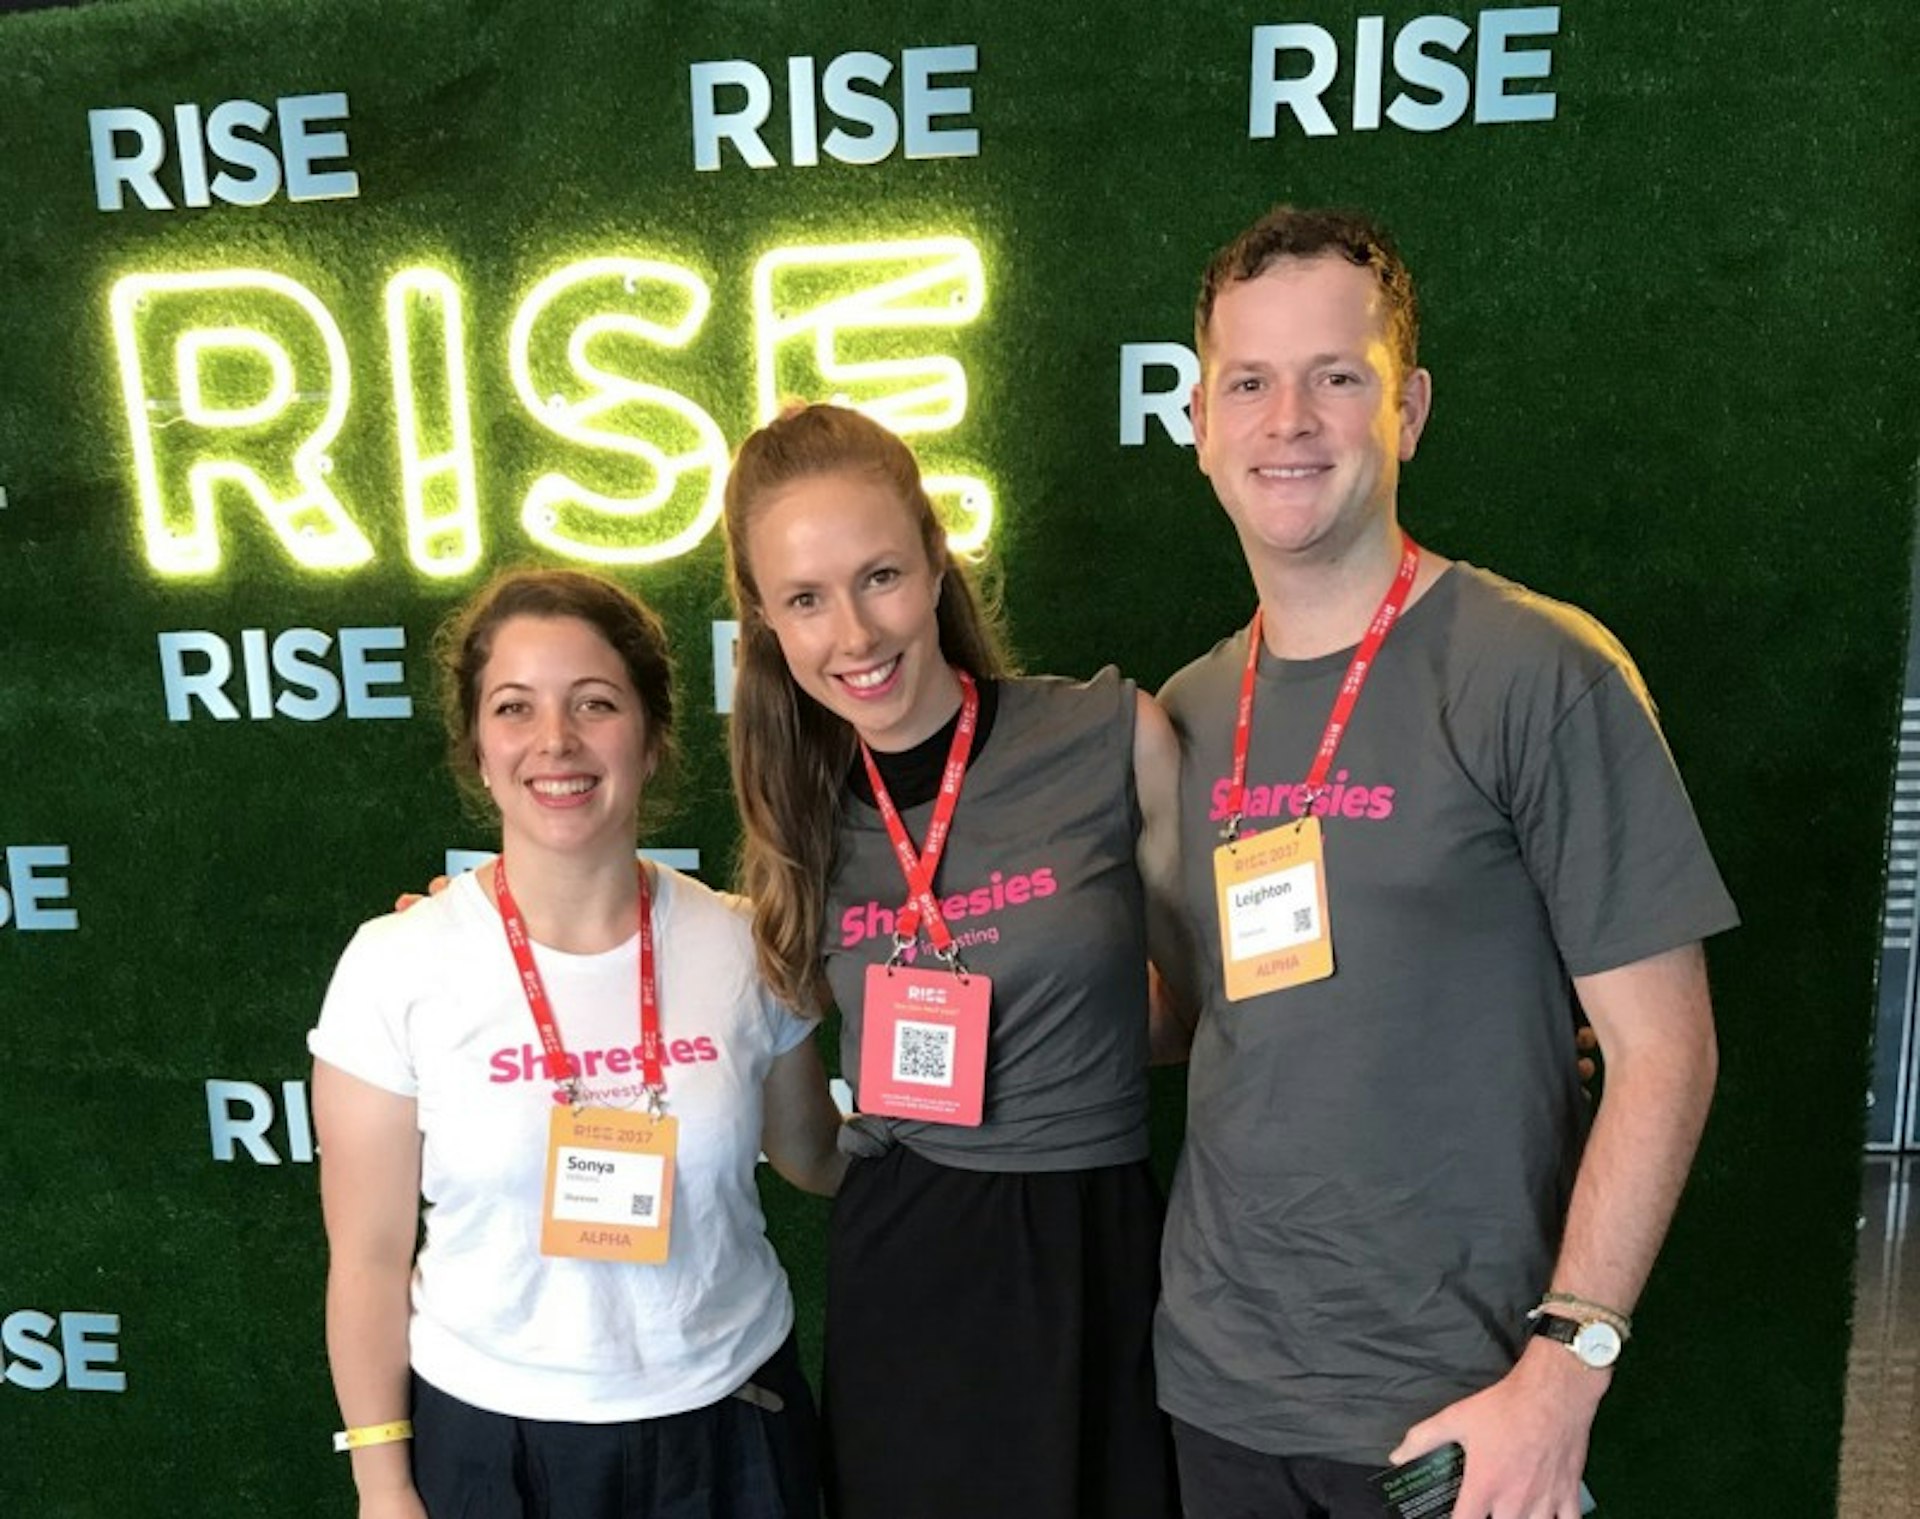 Highlights from the RISE conference